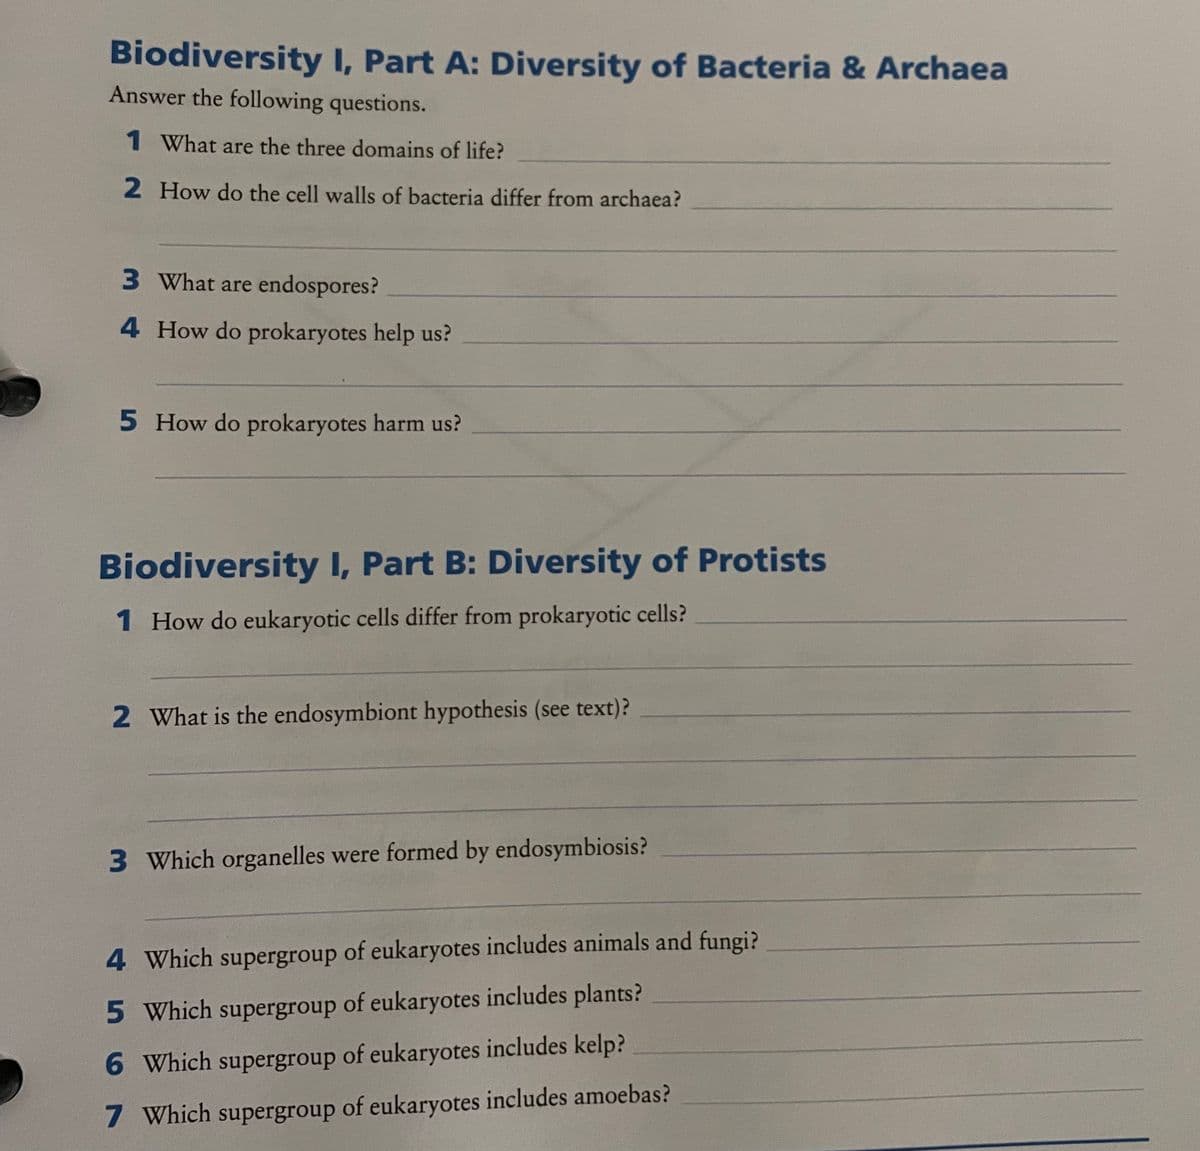 Biodiversity I, Part A: Diversity of Bacteria & Archaea
Answer the following questions.
1 What are the three domains of life?
2 How do the cell walls of bacteria differ from archaea?
3 What are endospores?
4 How do prokaryotes help us?
5 How do prokaryotes harm us?
Biodiversity I, Part B: Diversity of Protists
1 How do eukaryotic cells differ from prokaryotic cells?
2 What is the endosymbiont hypothesis (see text)?
3 Which organelles were formed by endosymbiosis?
4 Which supergroup of eukaryotes includes animals and fungi?
5 Which supergroup of eukaryotes includes plants?
6 Which supergroup of eukaryotes includes kelp?
7 Which supergroup of eukaryotes includes amoebas?
